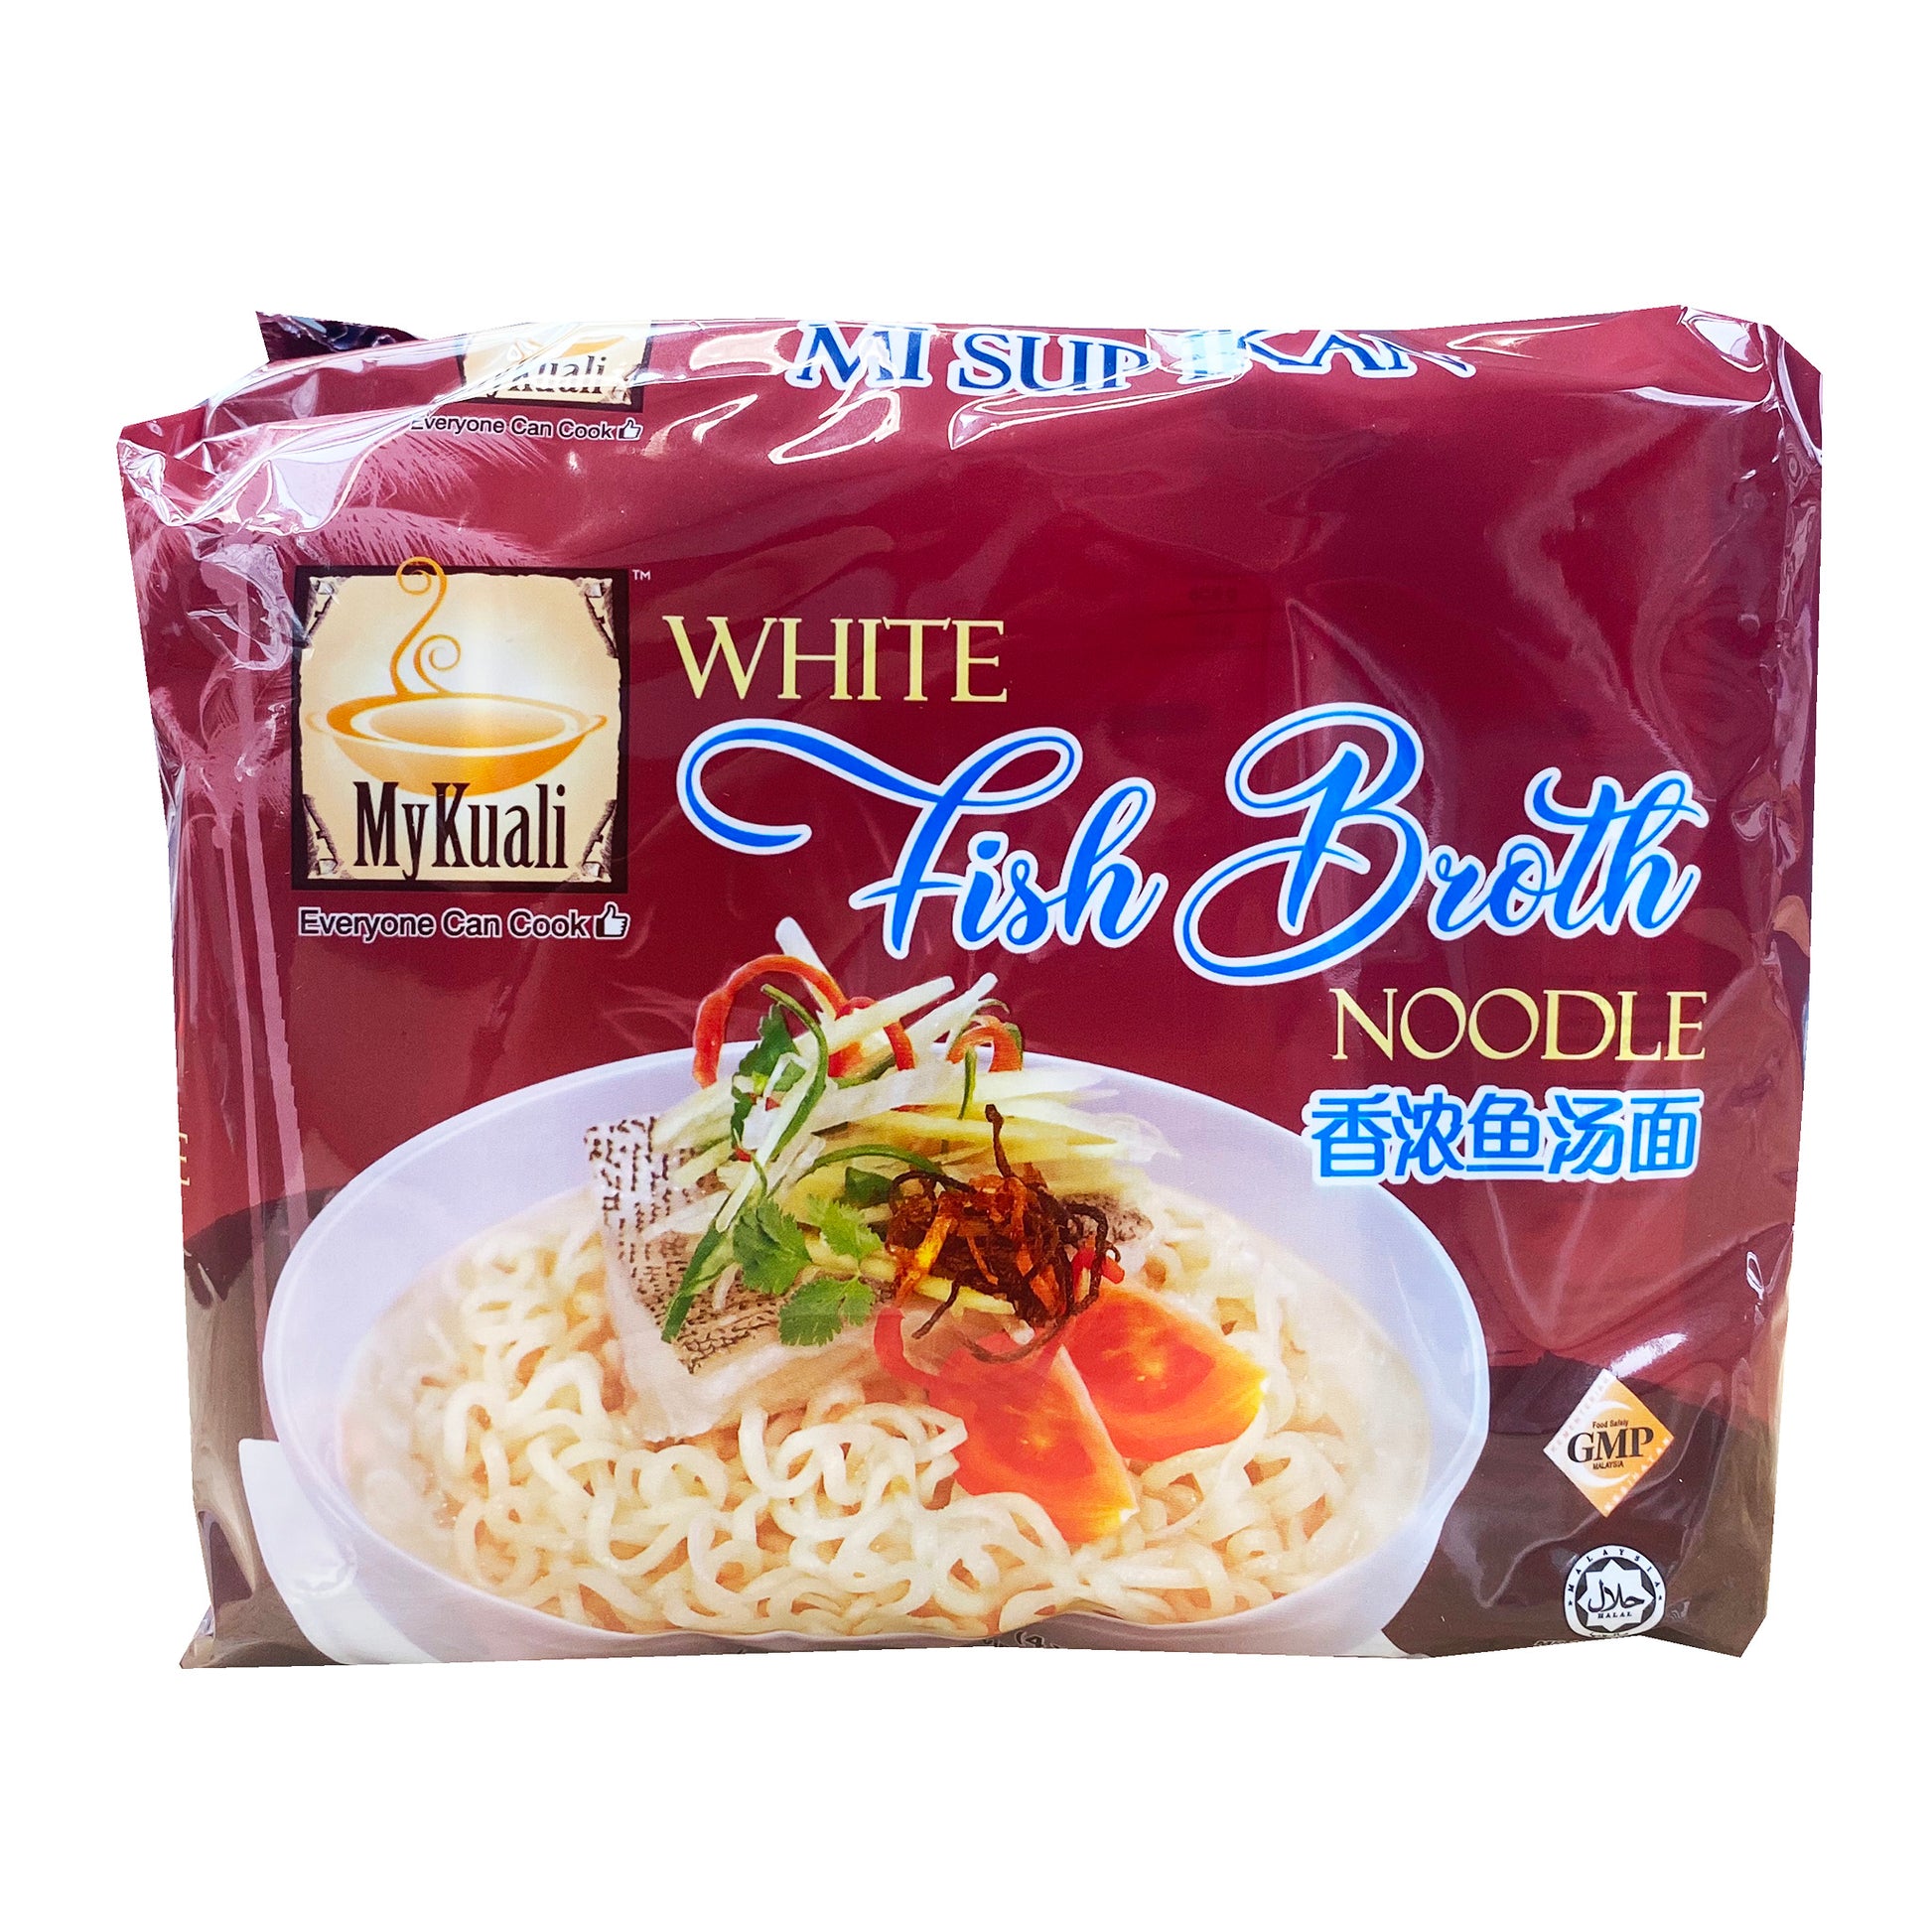 Front graphic image of MyKuali White Fish Broth Noodle 4 Pack 15.52oz